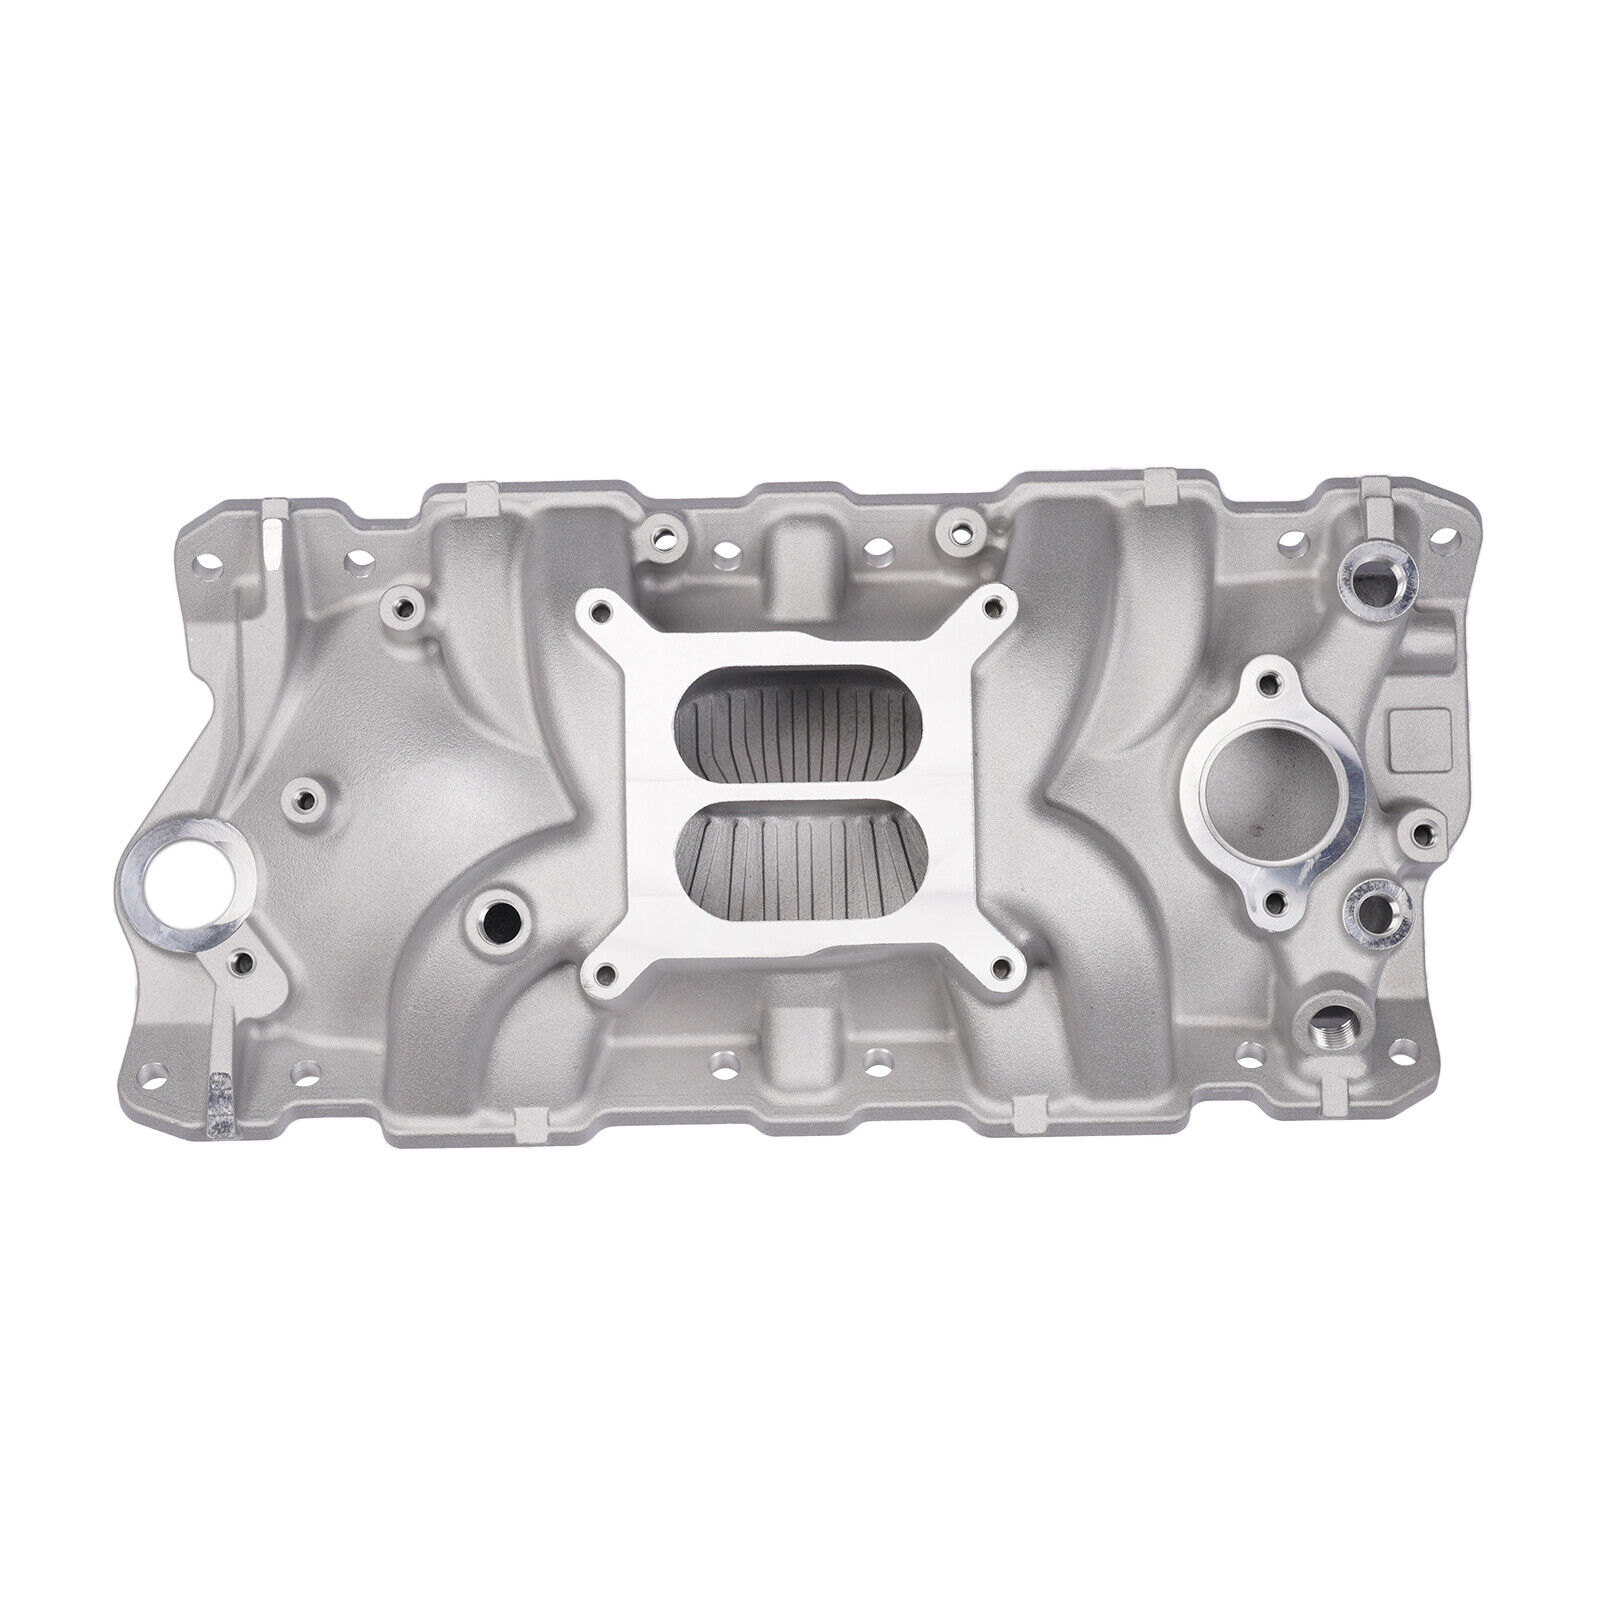 Aluminum Intake Manifold Front Fits for Chevrolet Small Block 305 350 ci 262-400